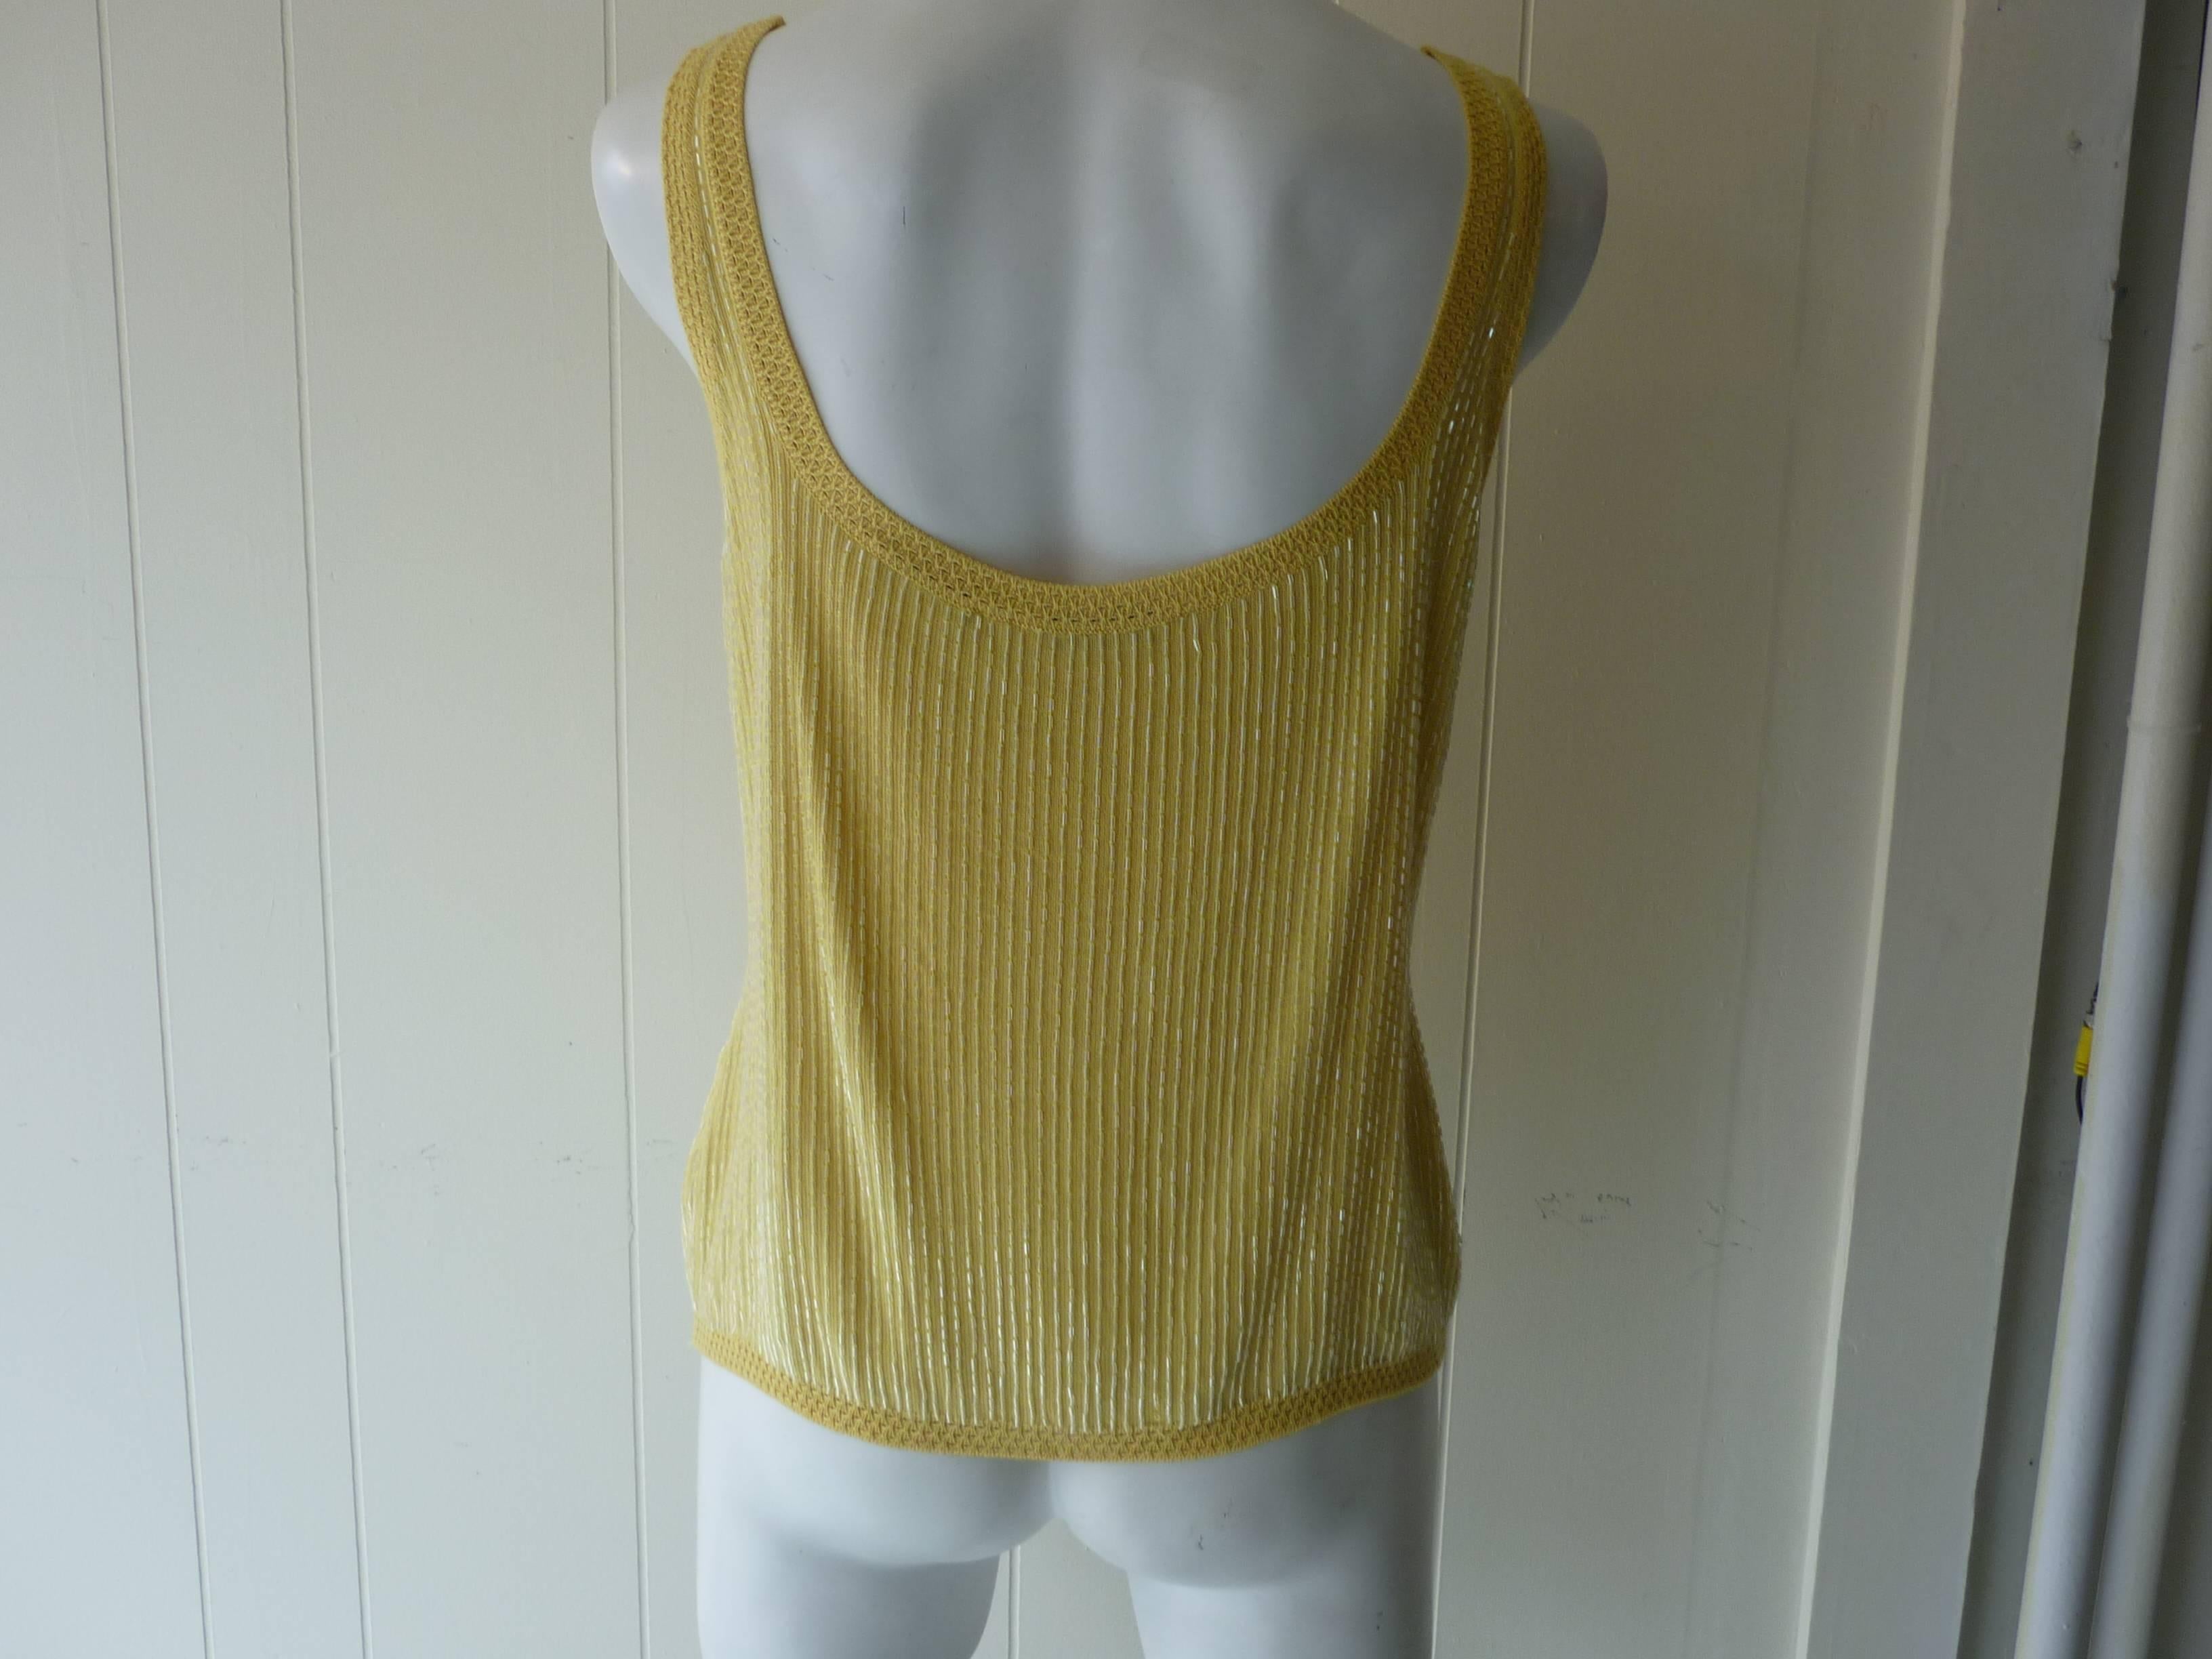 Rows of beads cover this yellow top which is trimmed with delicate open cotton weave.

Made in Italy

21%WS
21%SE
18%WO
40%VI